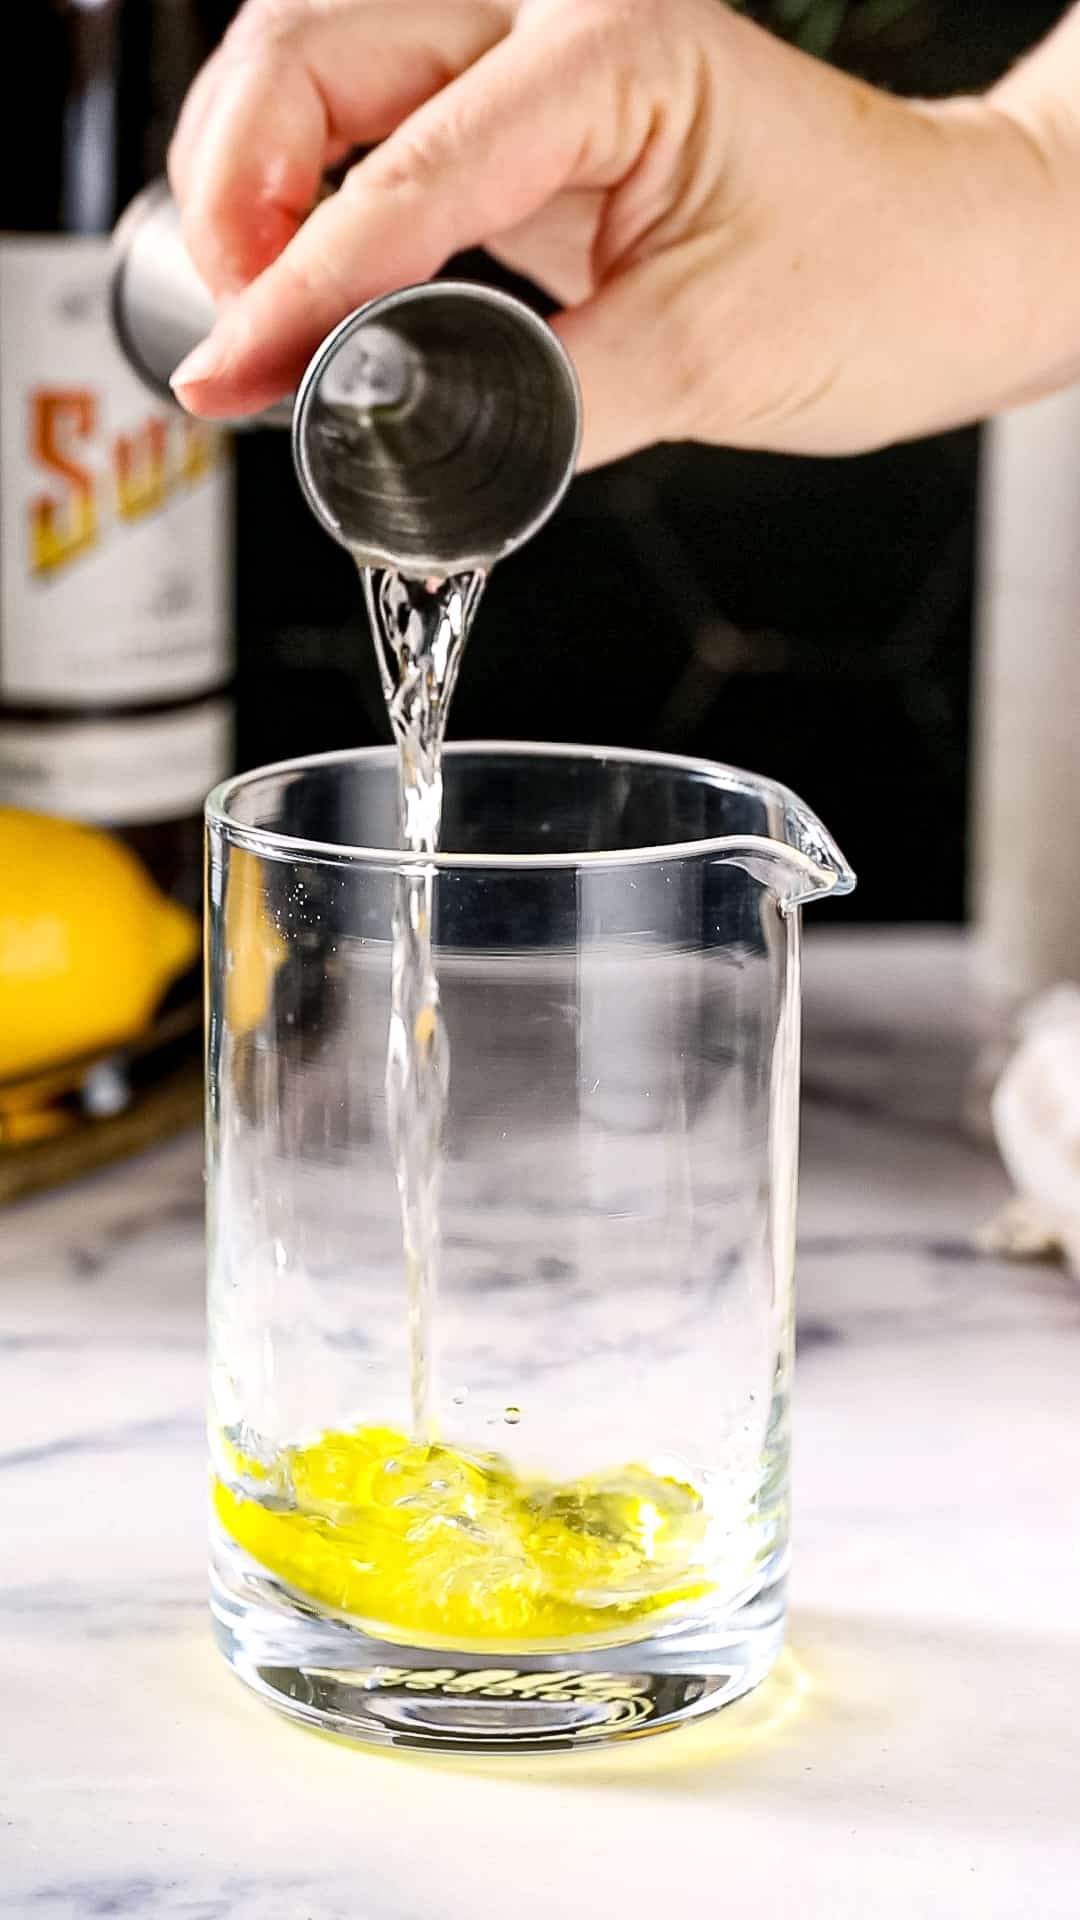 Hand using a jigger to pour dry vermouth into a mixing glass filled with yellow liquid.